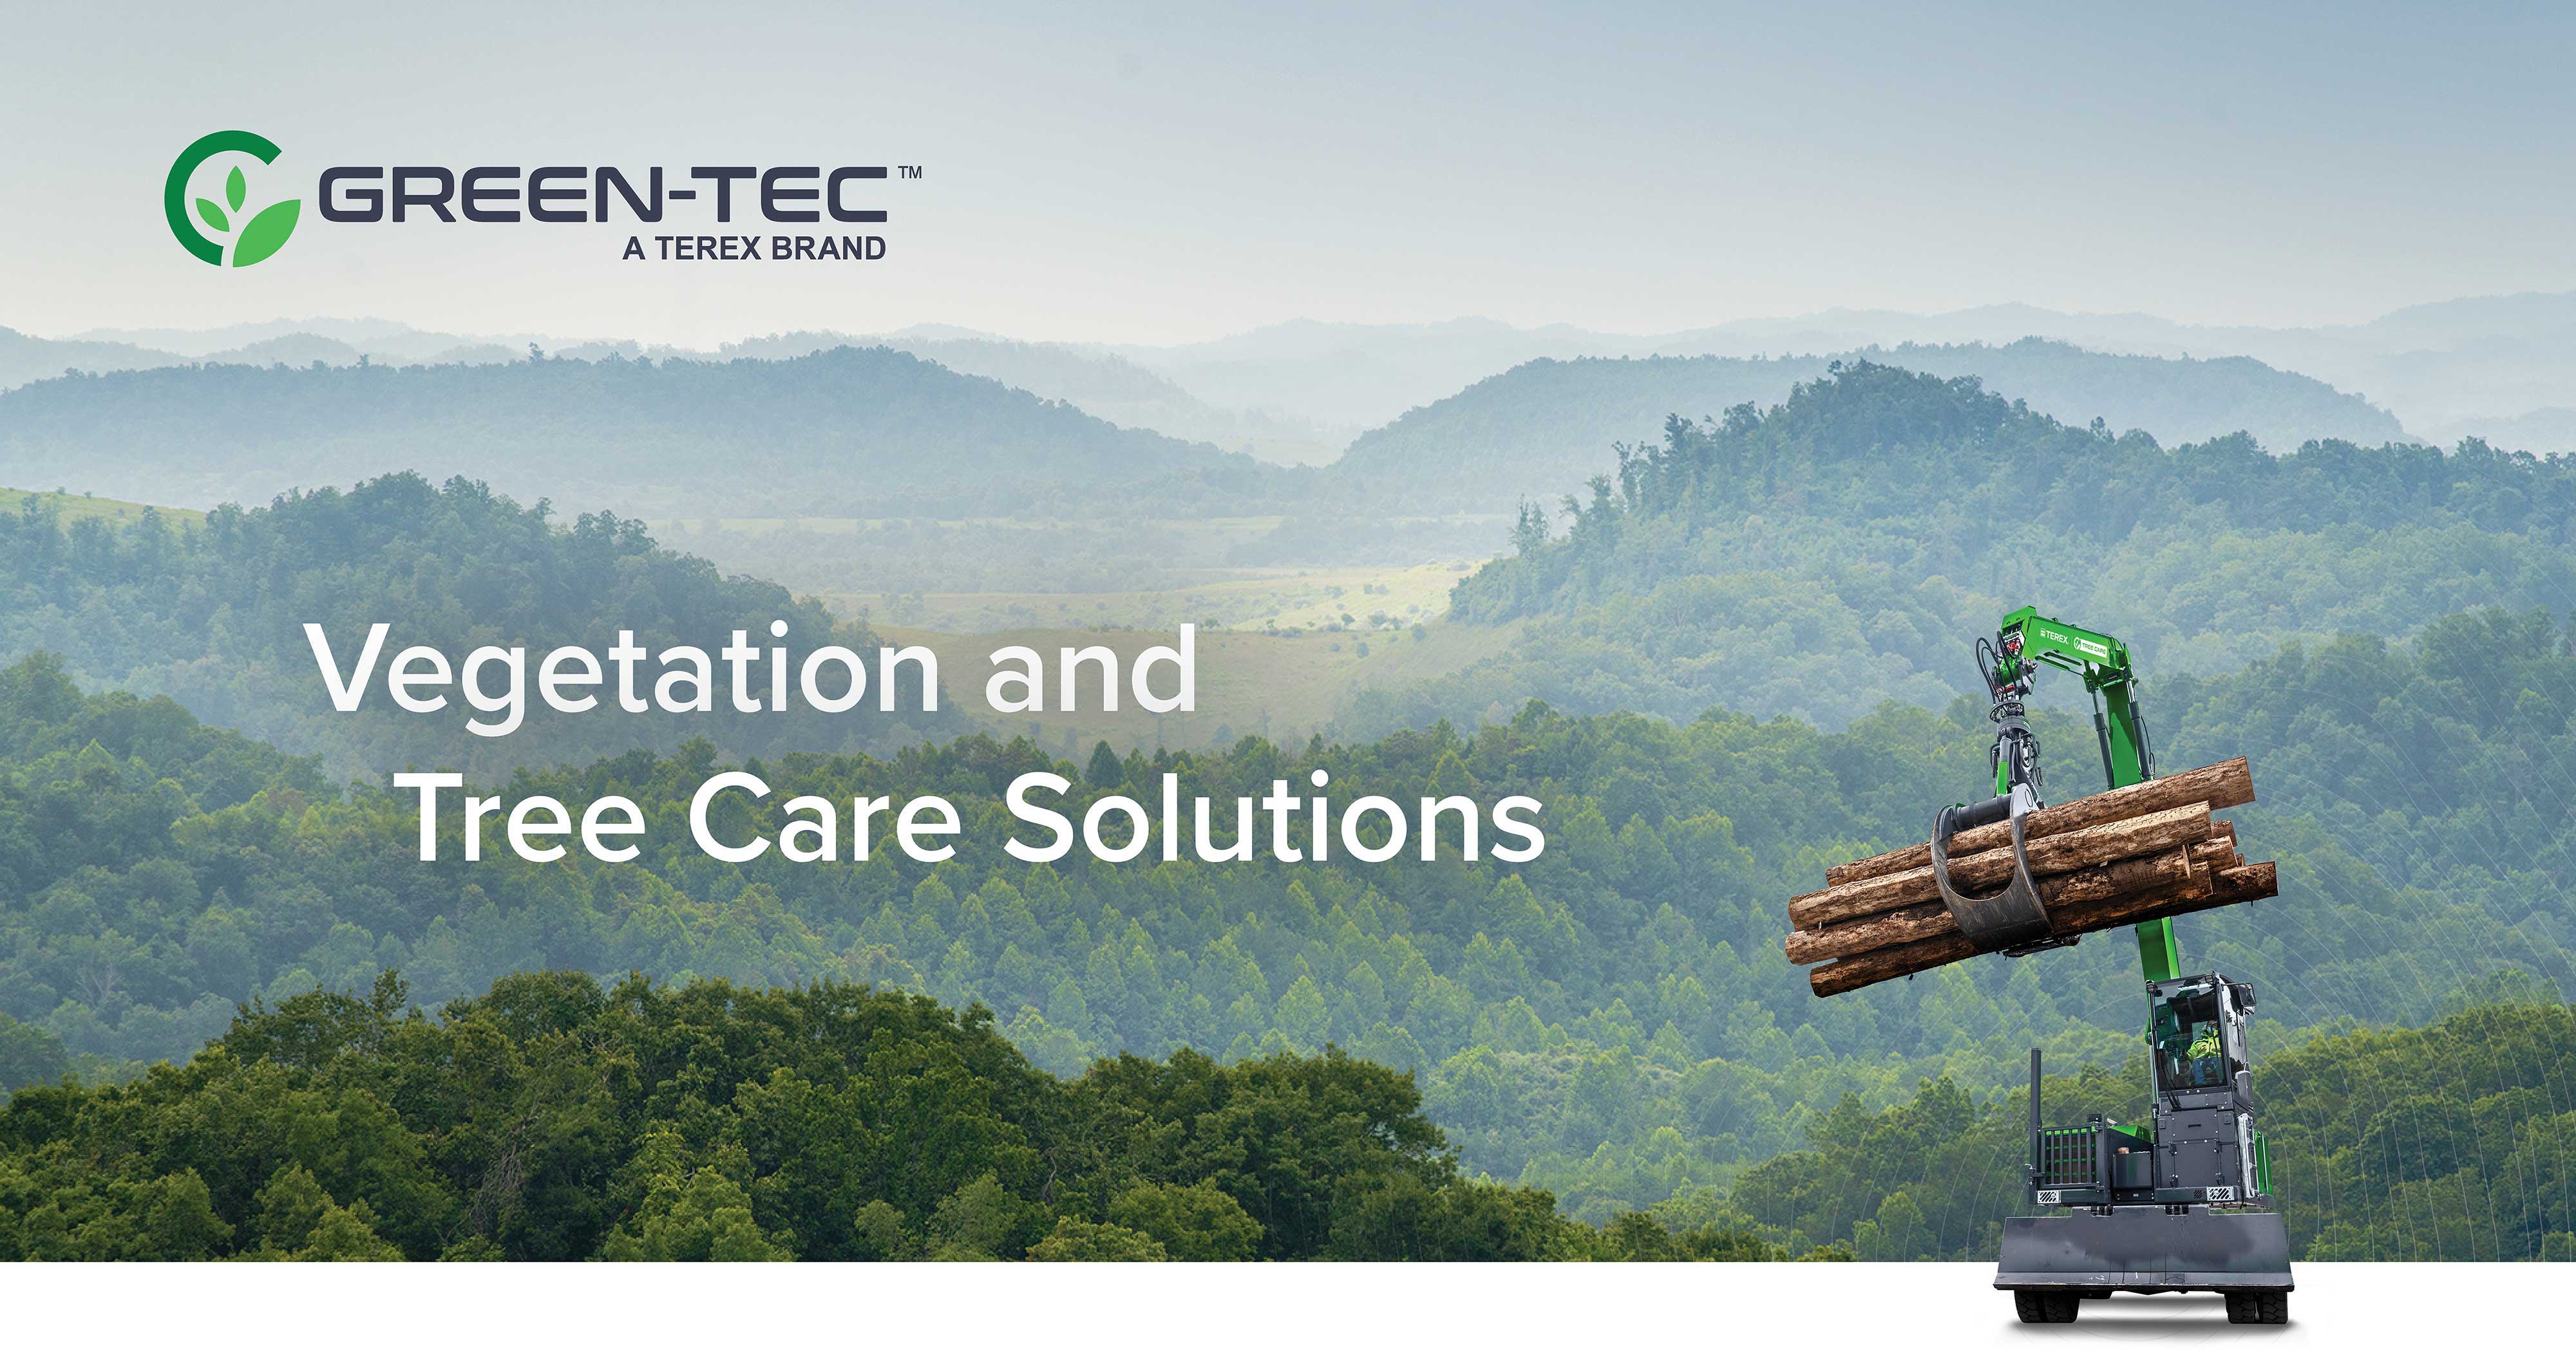 Green-Tec Vegetation and Tree Care Solutions